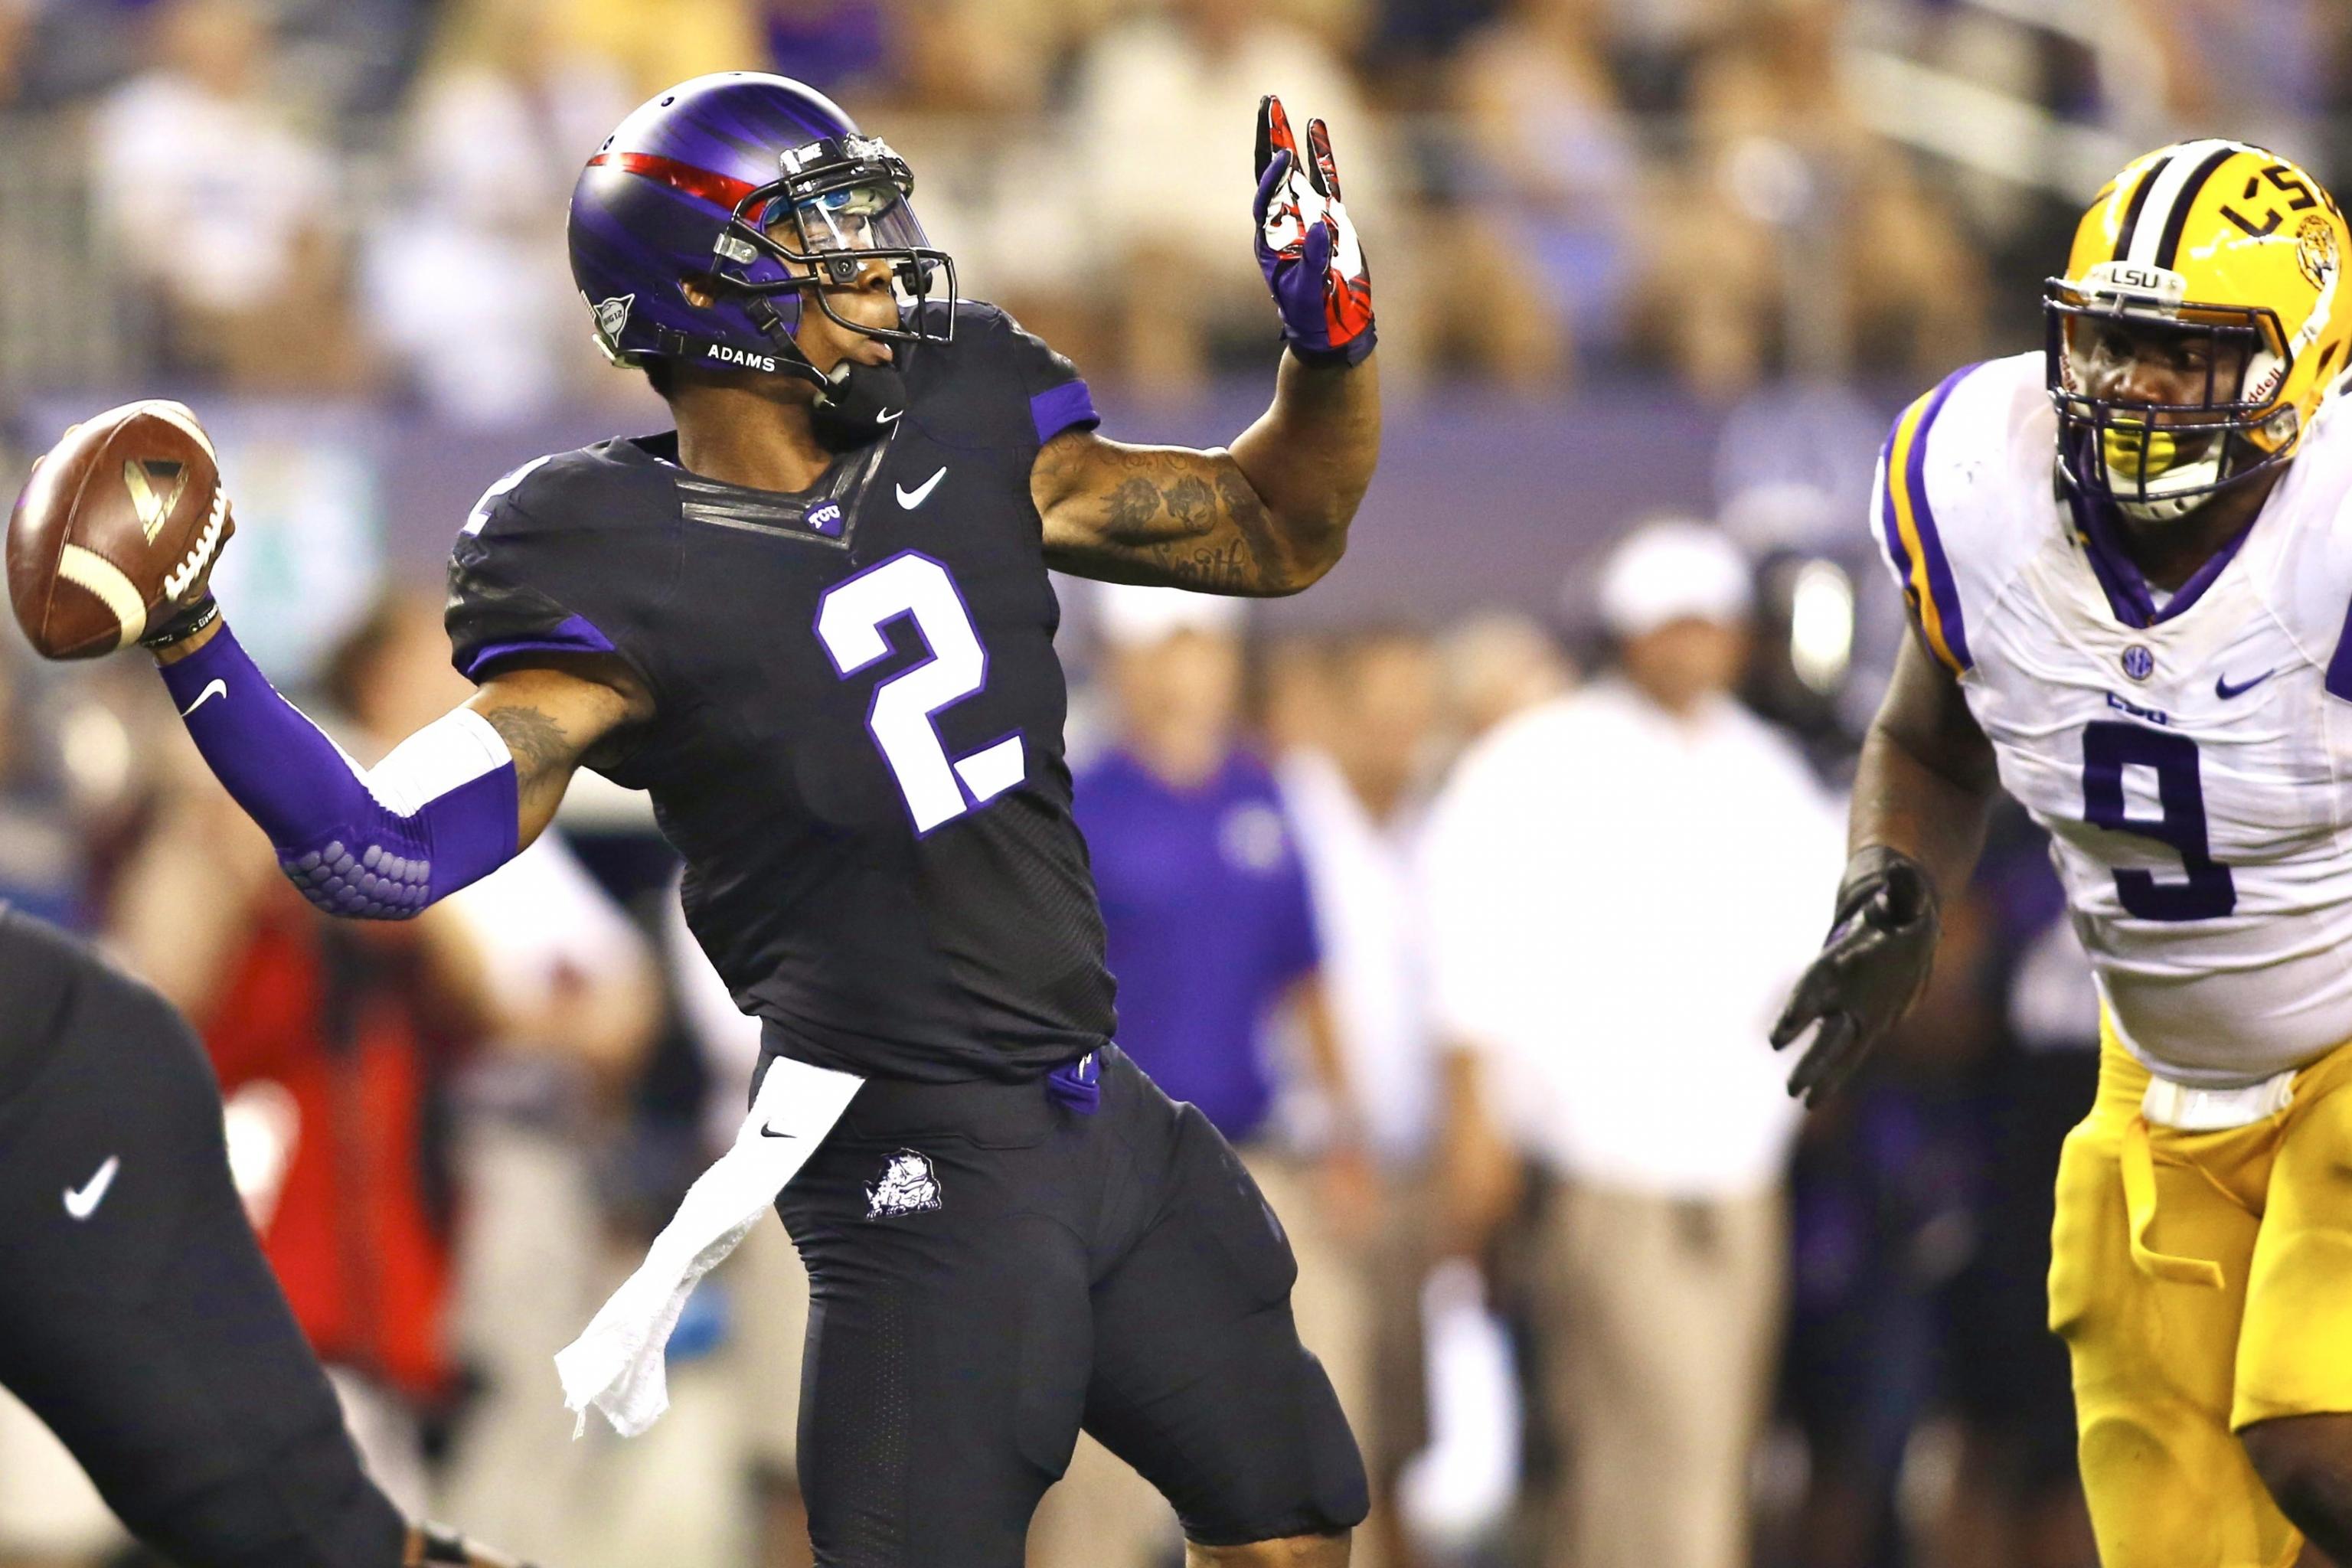 TCU Horned Frogs Unveil Alternate Uniforms With Blood Red Accents – SportsLogos.Net News